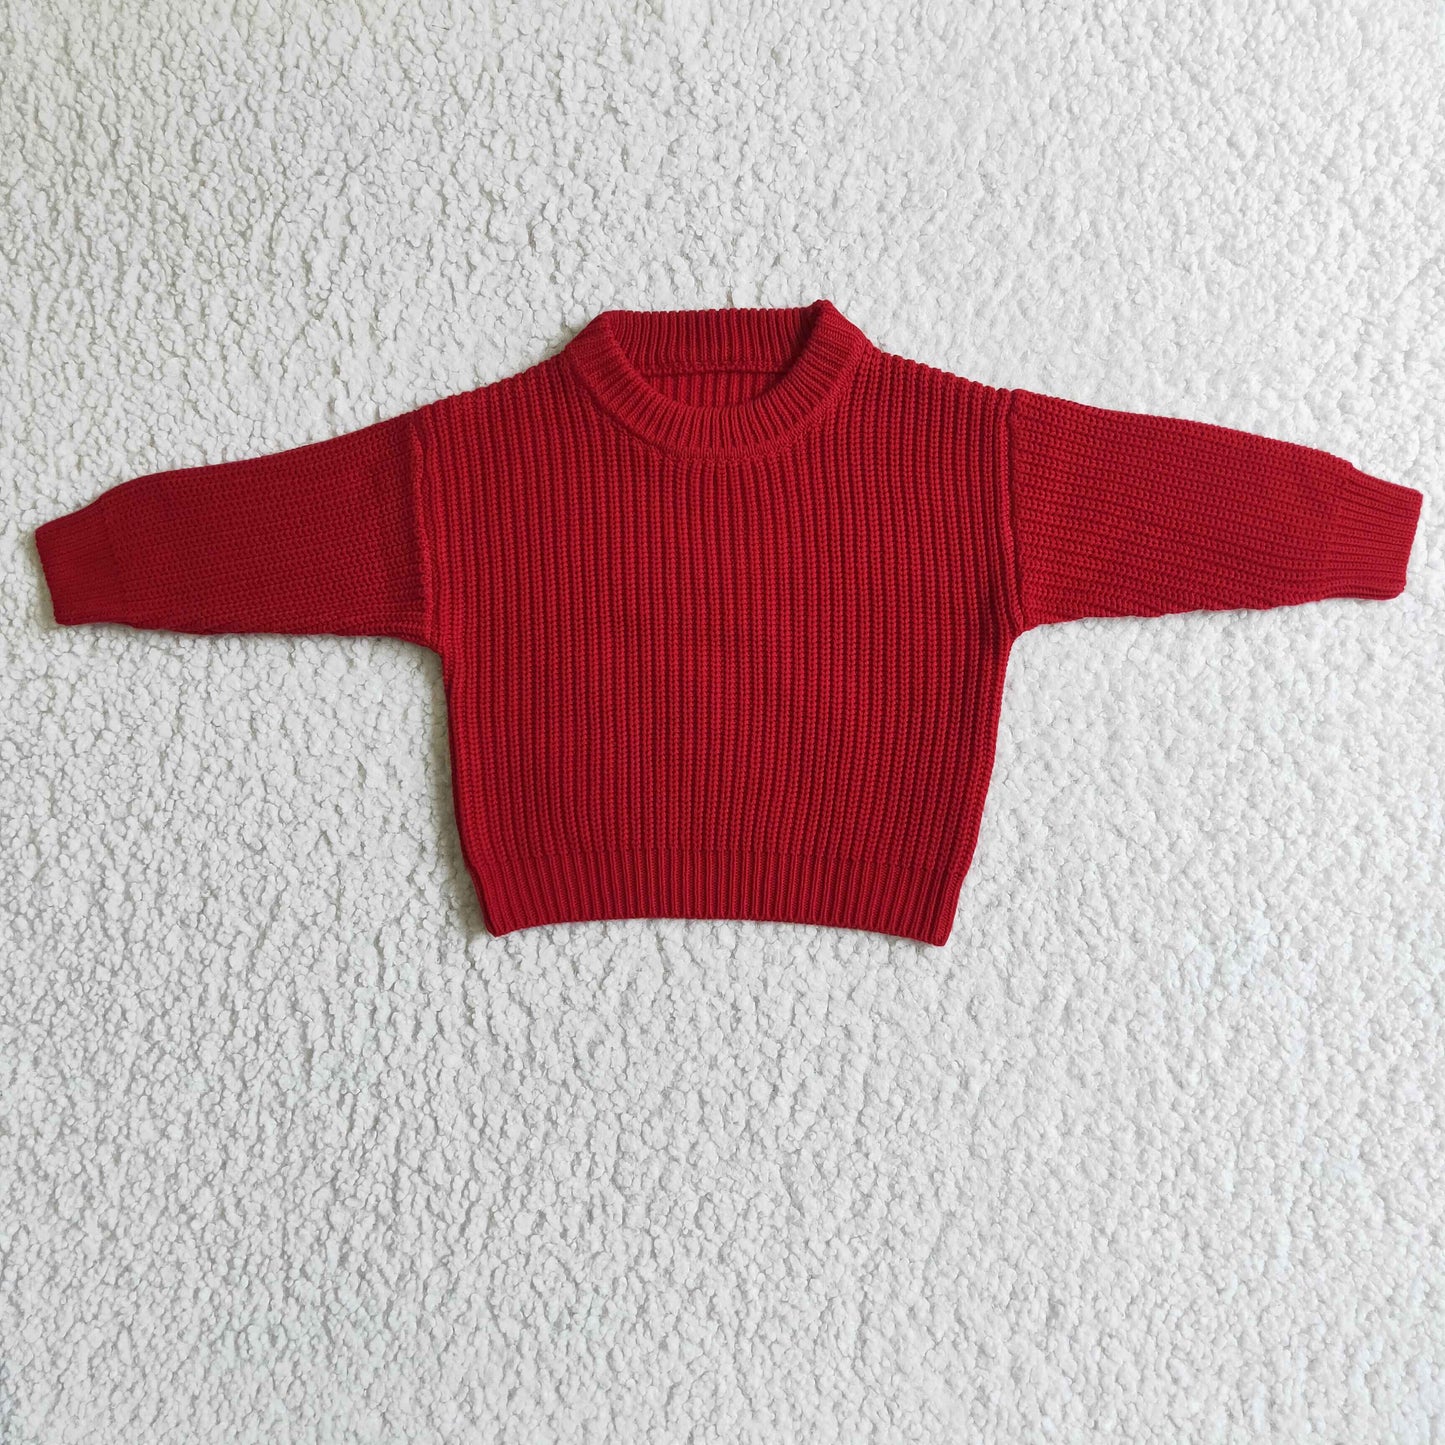 GT0036 Children's pink knitted sweater